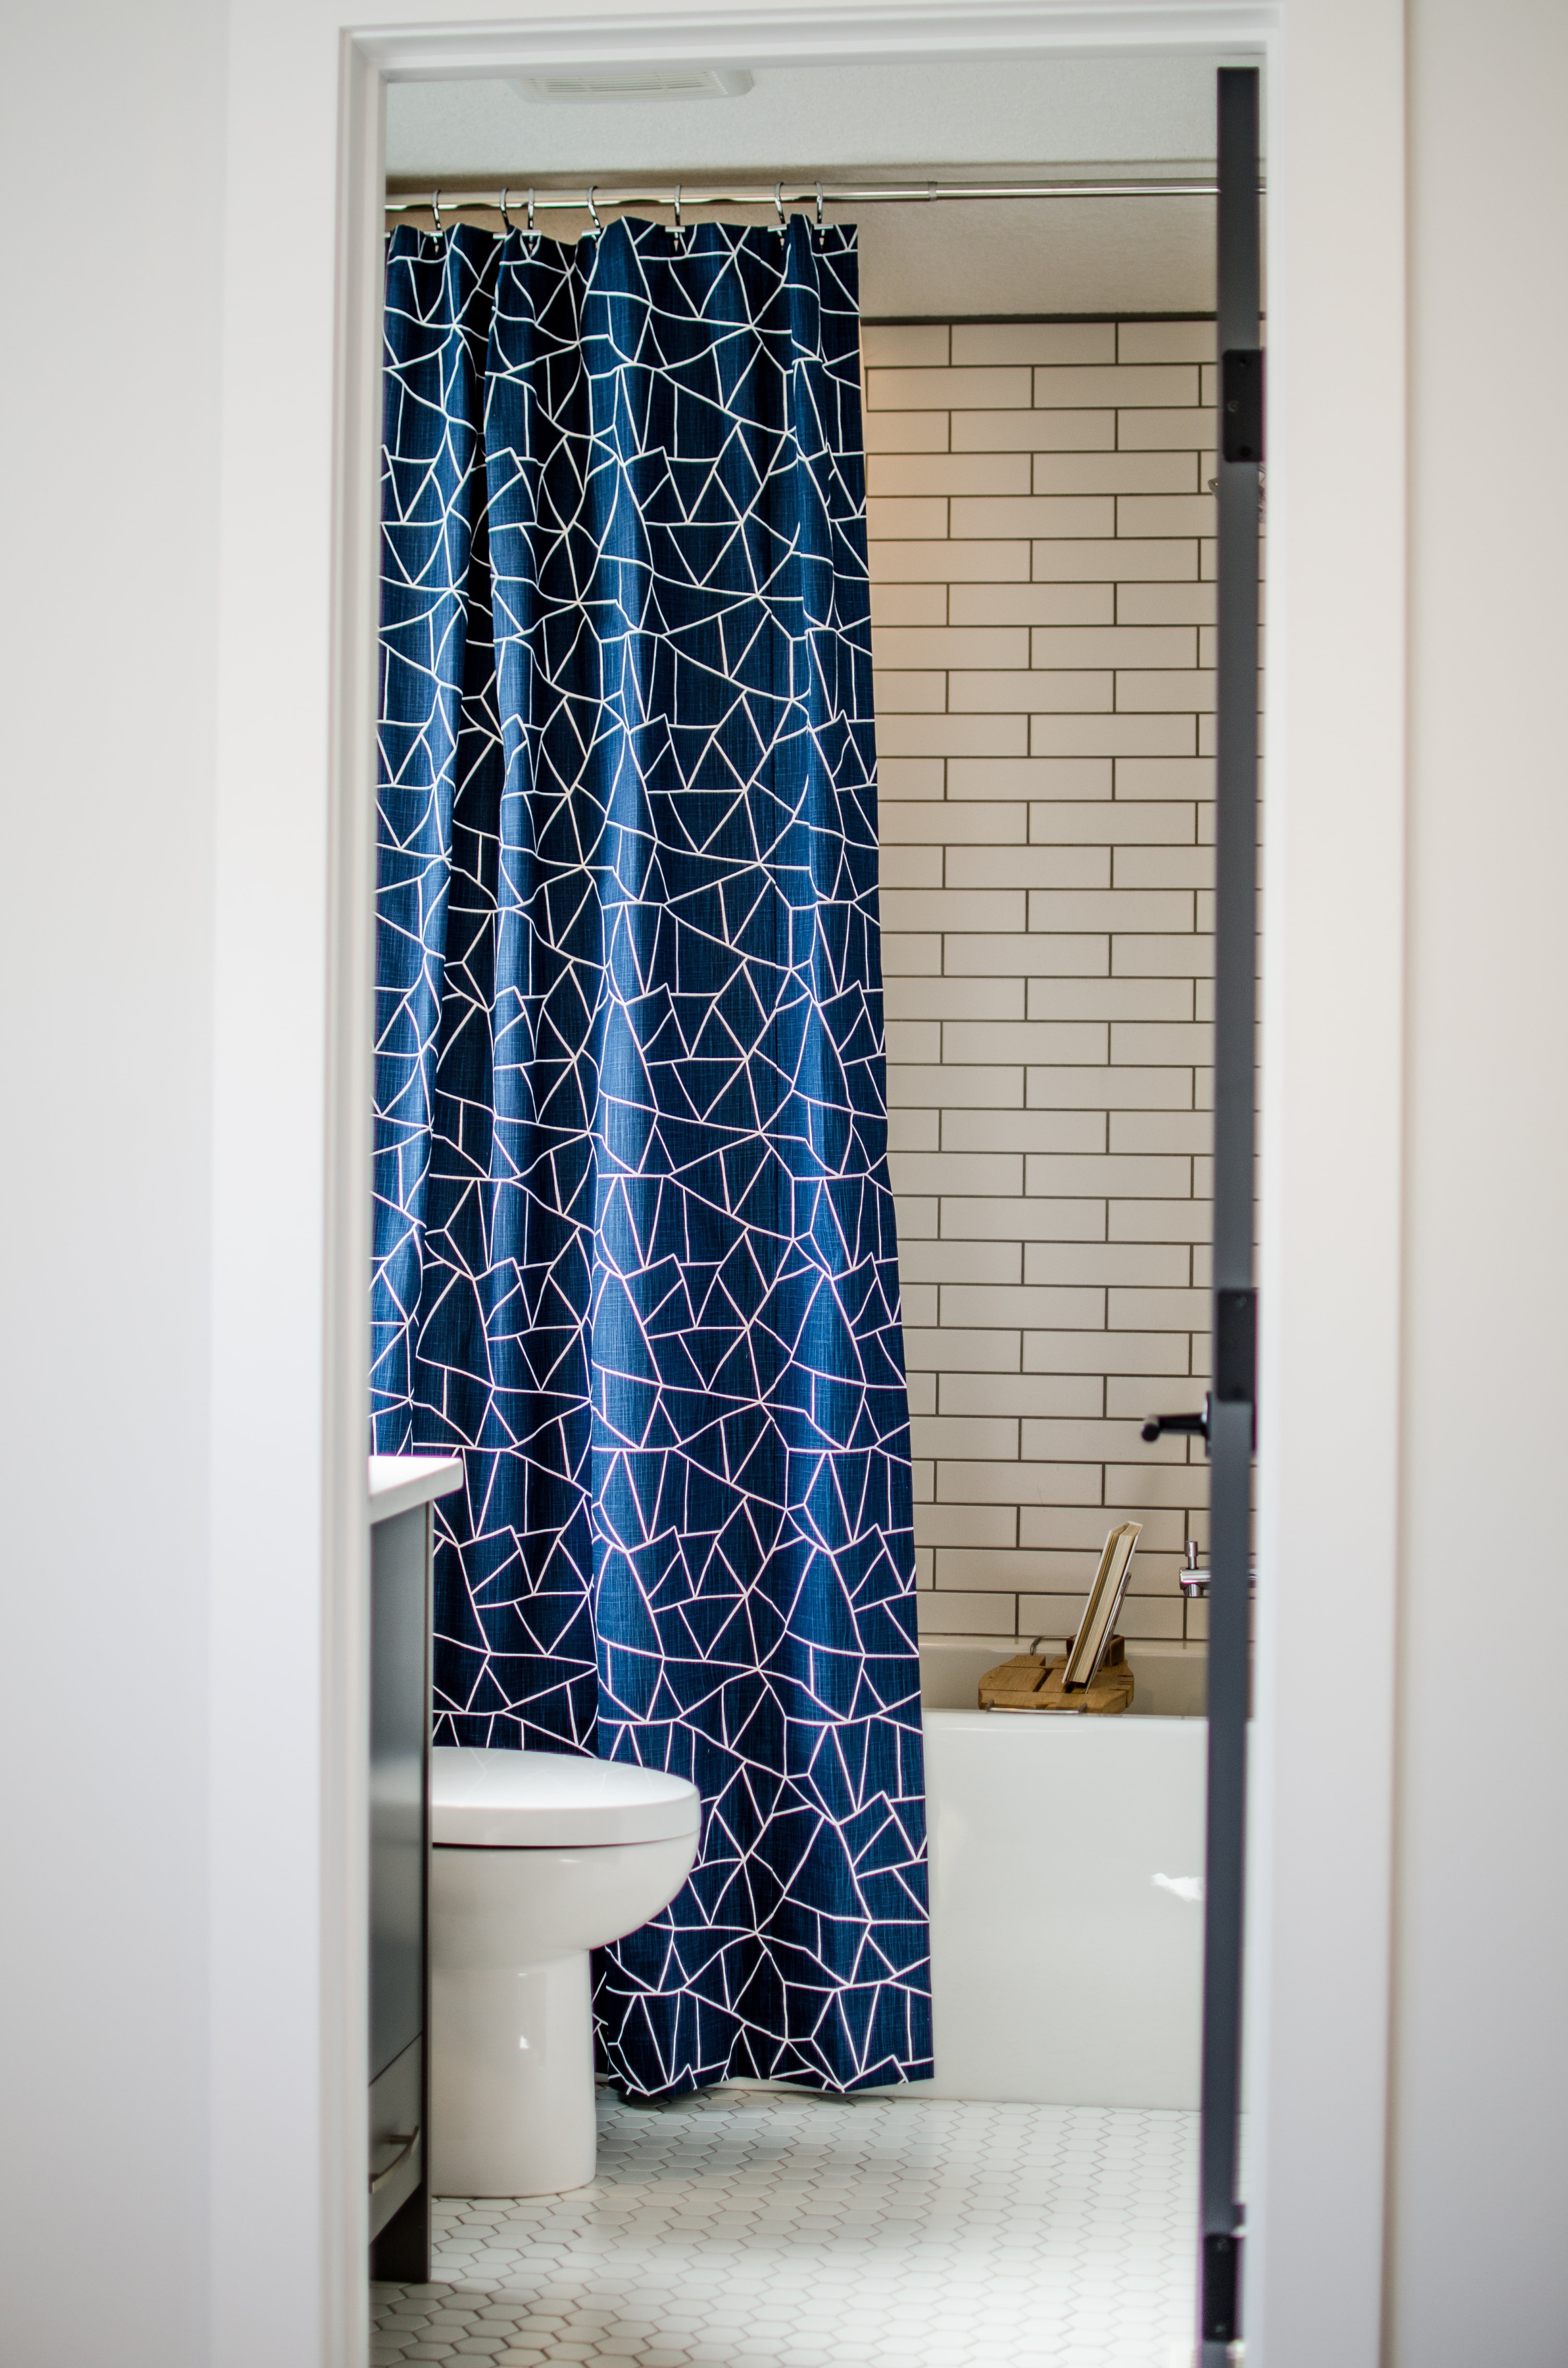 Geo Mod Floor To Ceiling Shower Curtain, How Wide Should A Shower Curtain Be Off The Floor